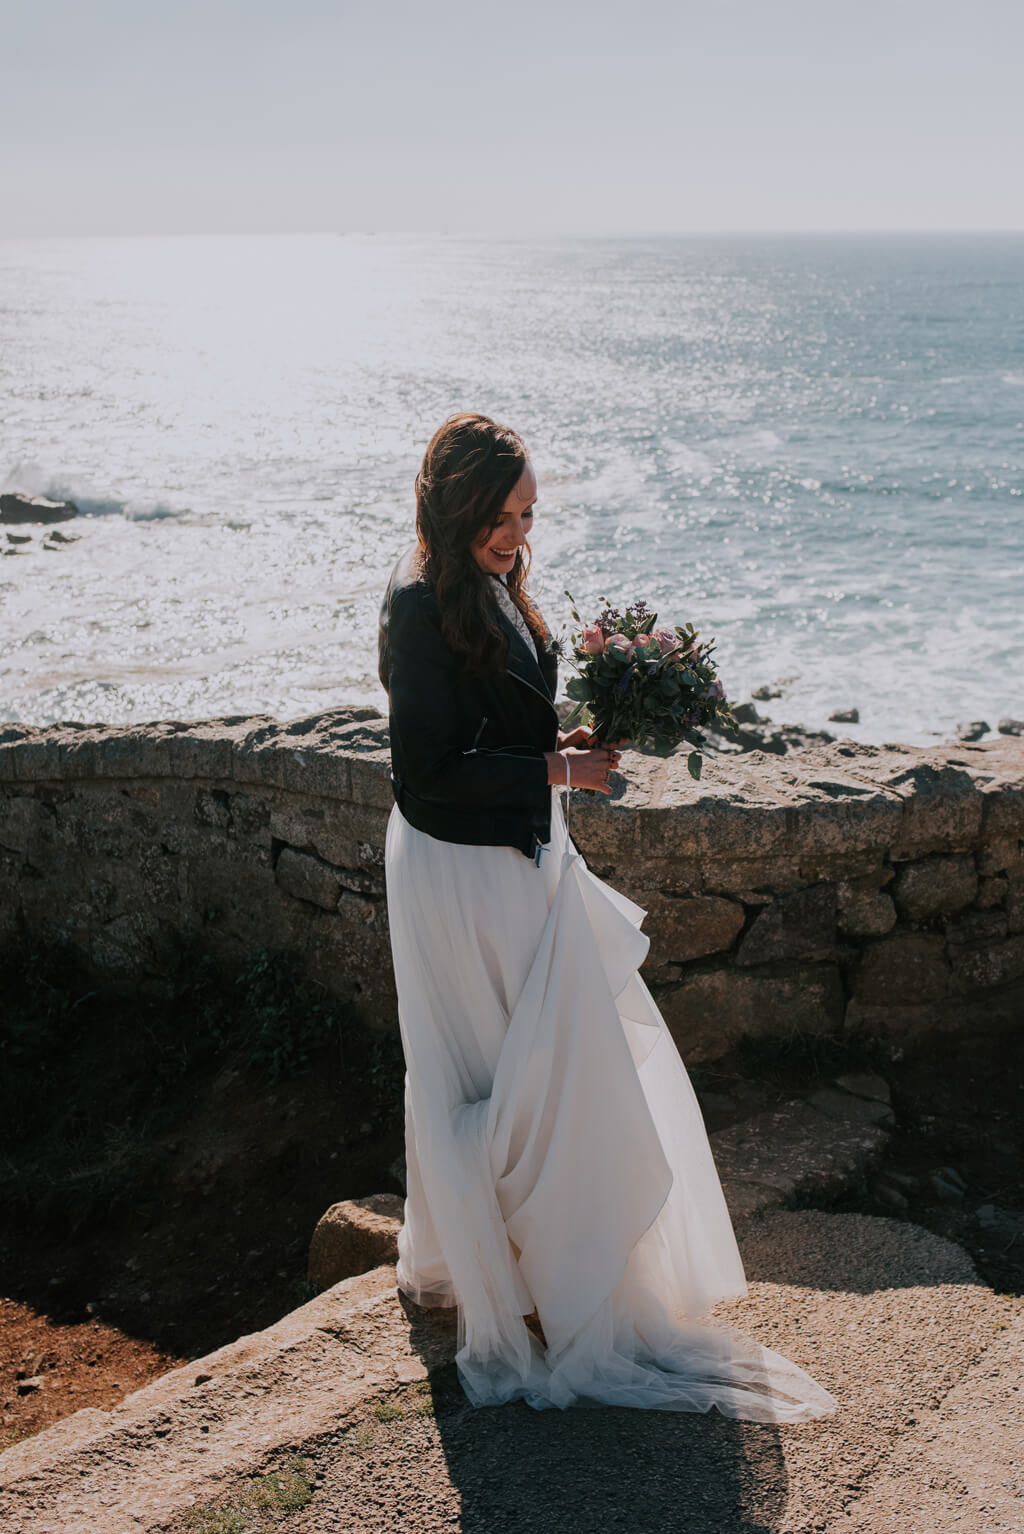 Ellie and Dale's Elopement, Boho Cornwall - Photography by Arianna Fenton